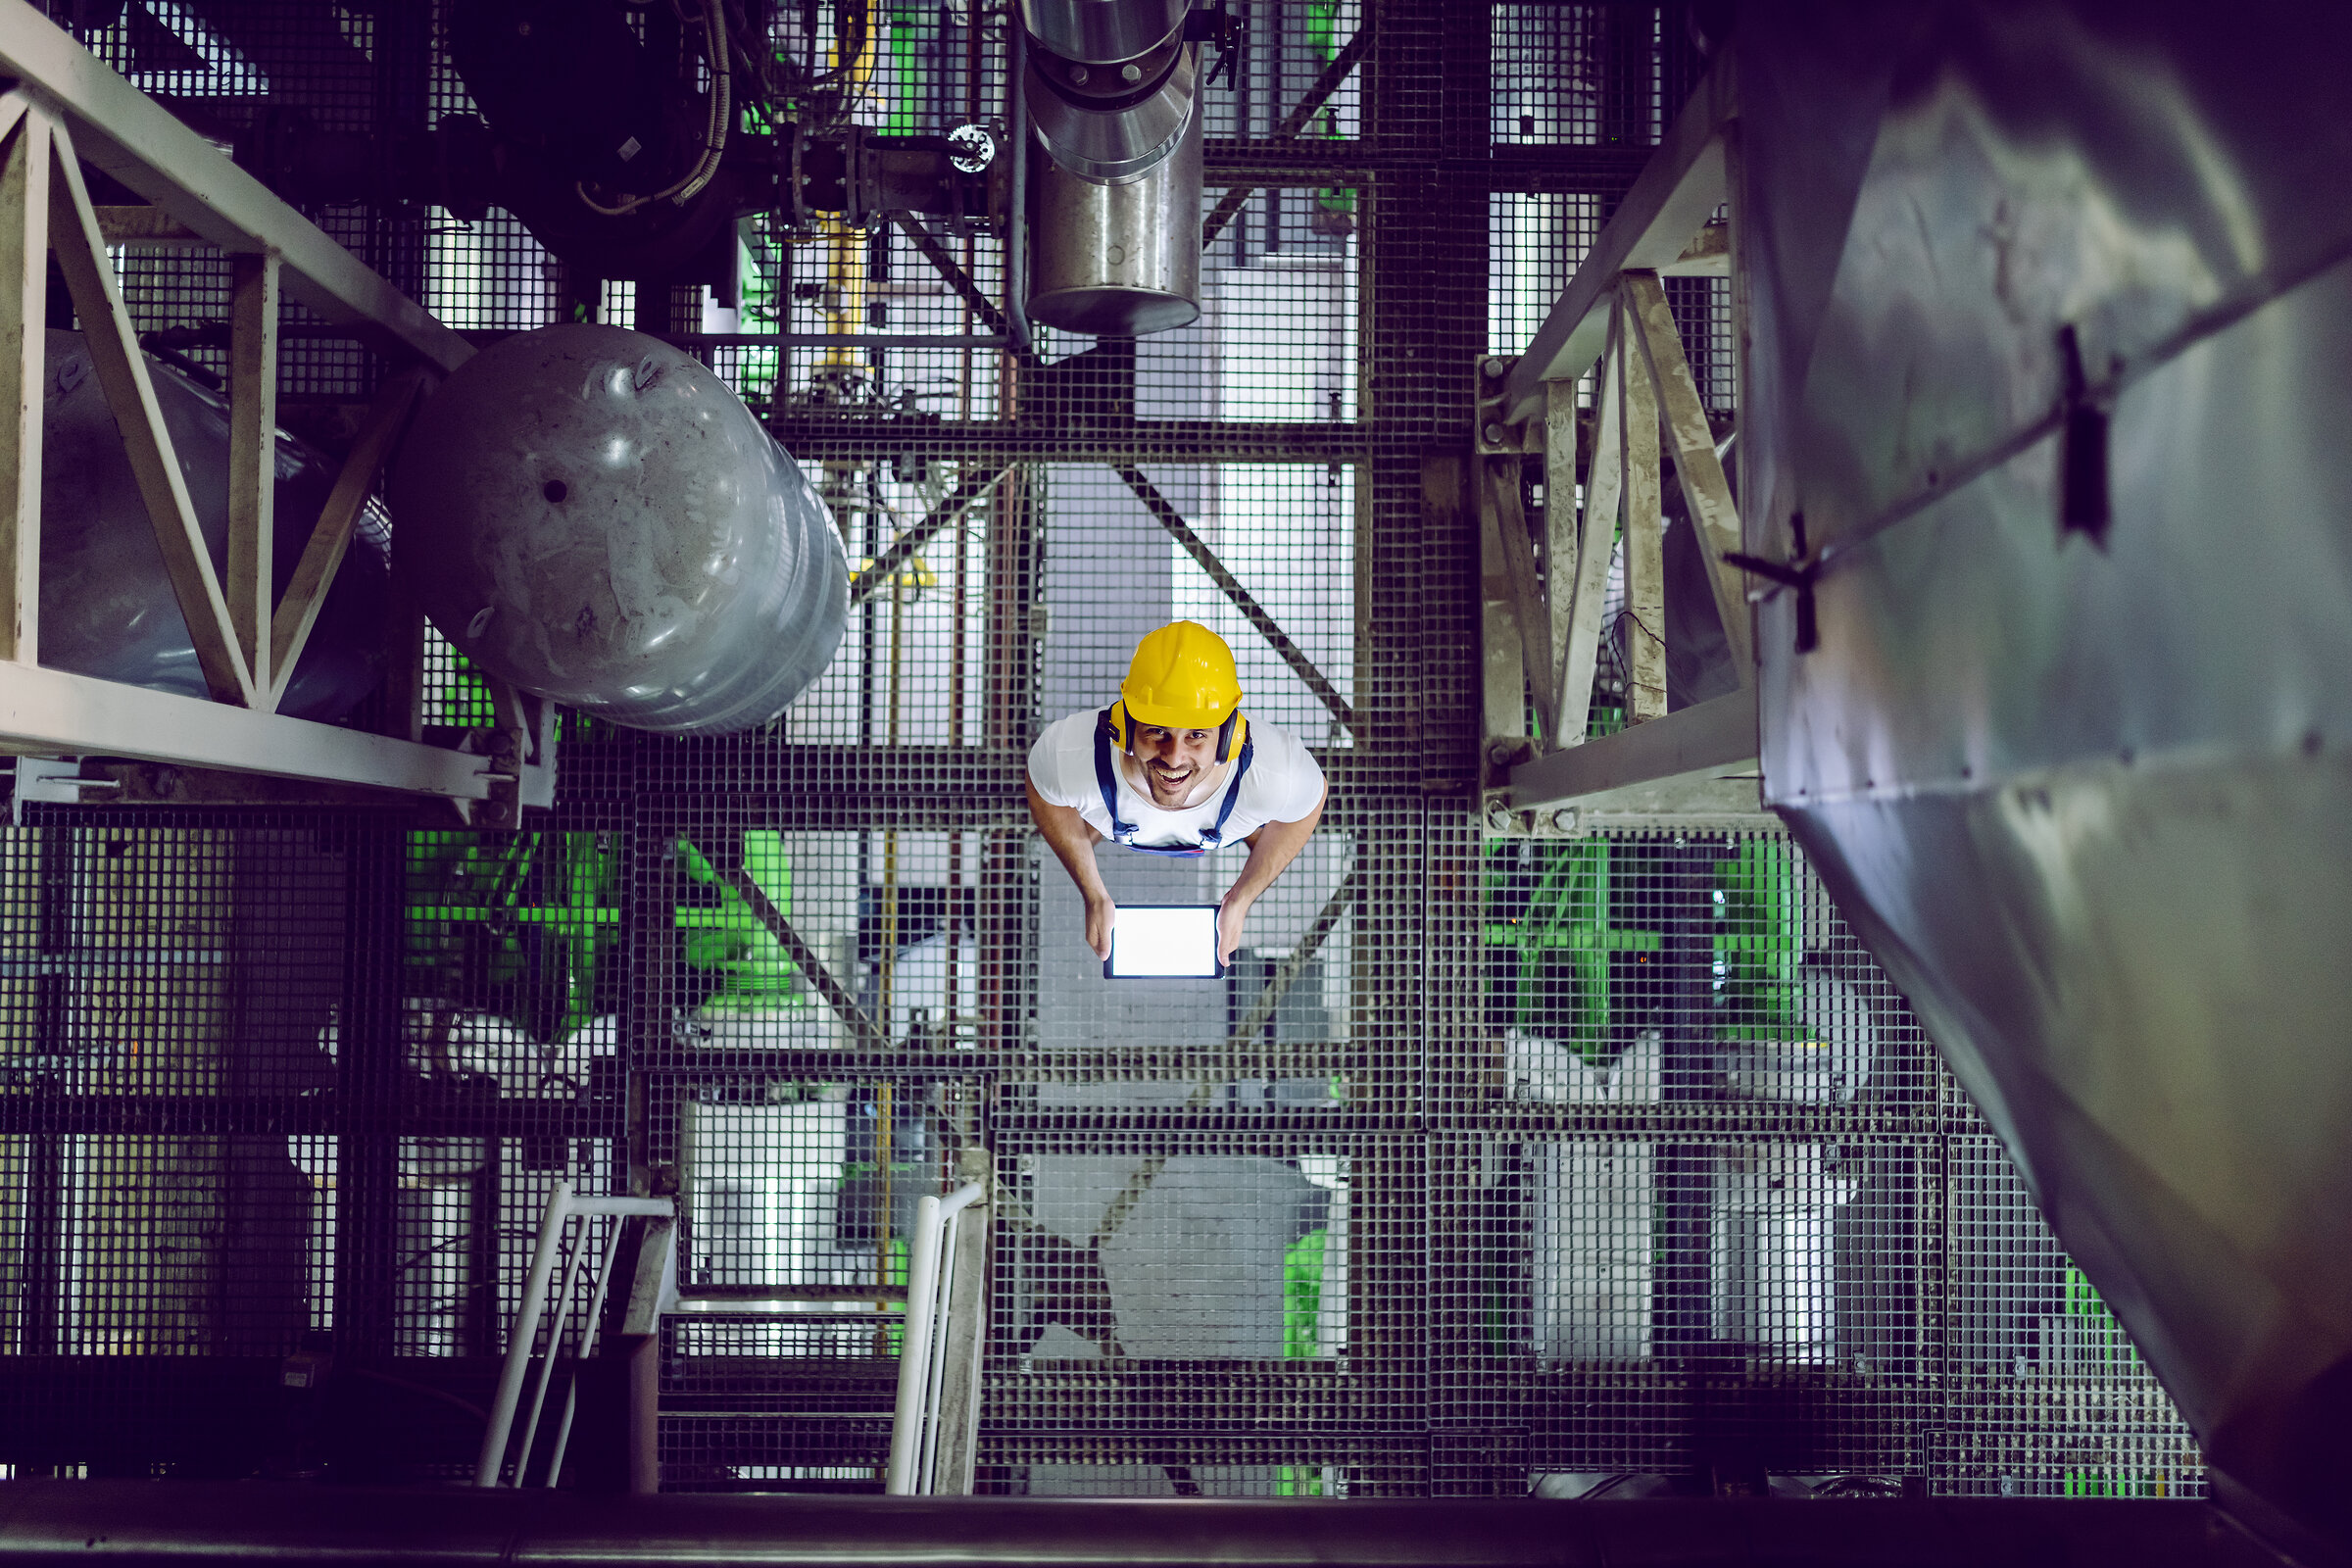 Top view of smiling plant worker in protective clothing using ta